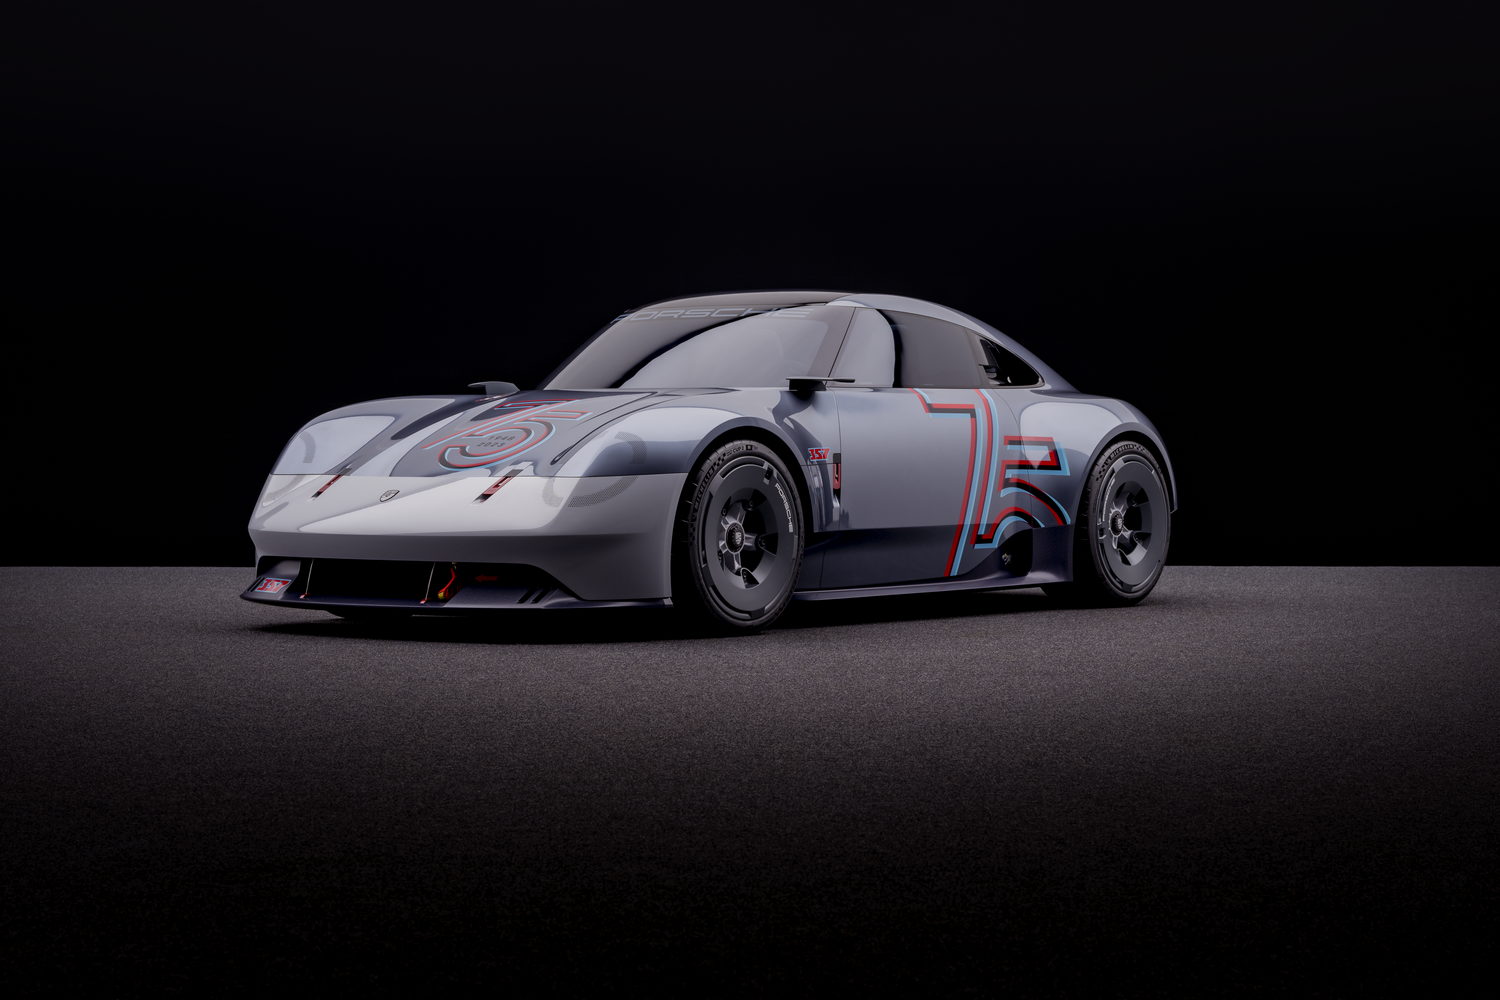 Vision 357 concept celebrates 75 years of Porsche road cars. Image by Porsche.